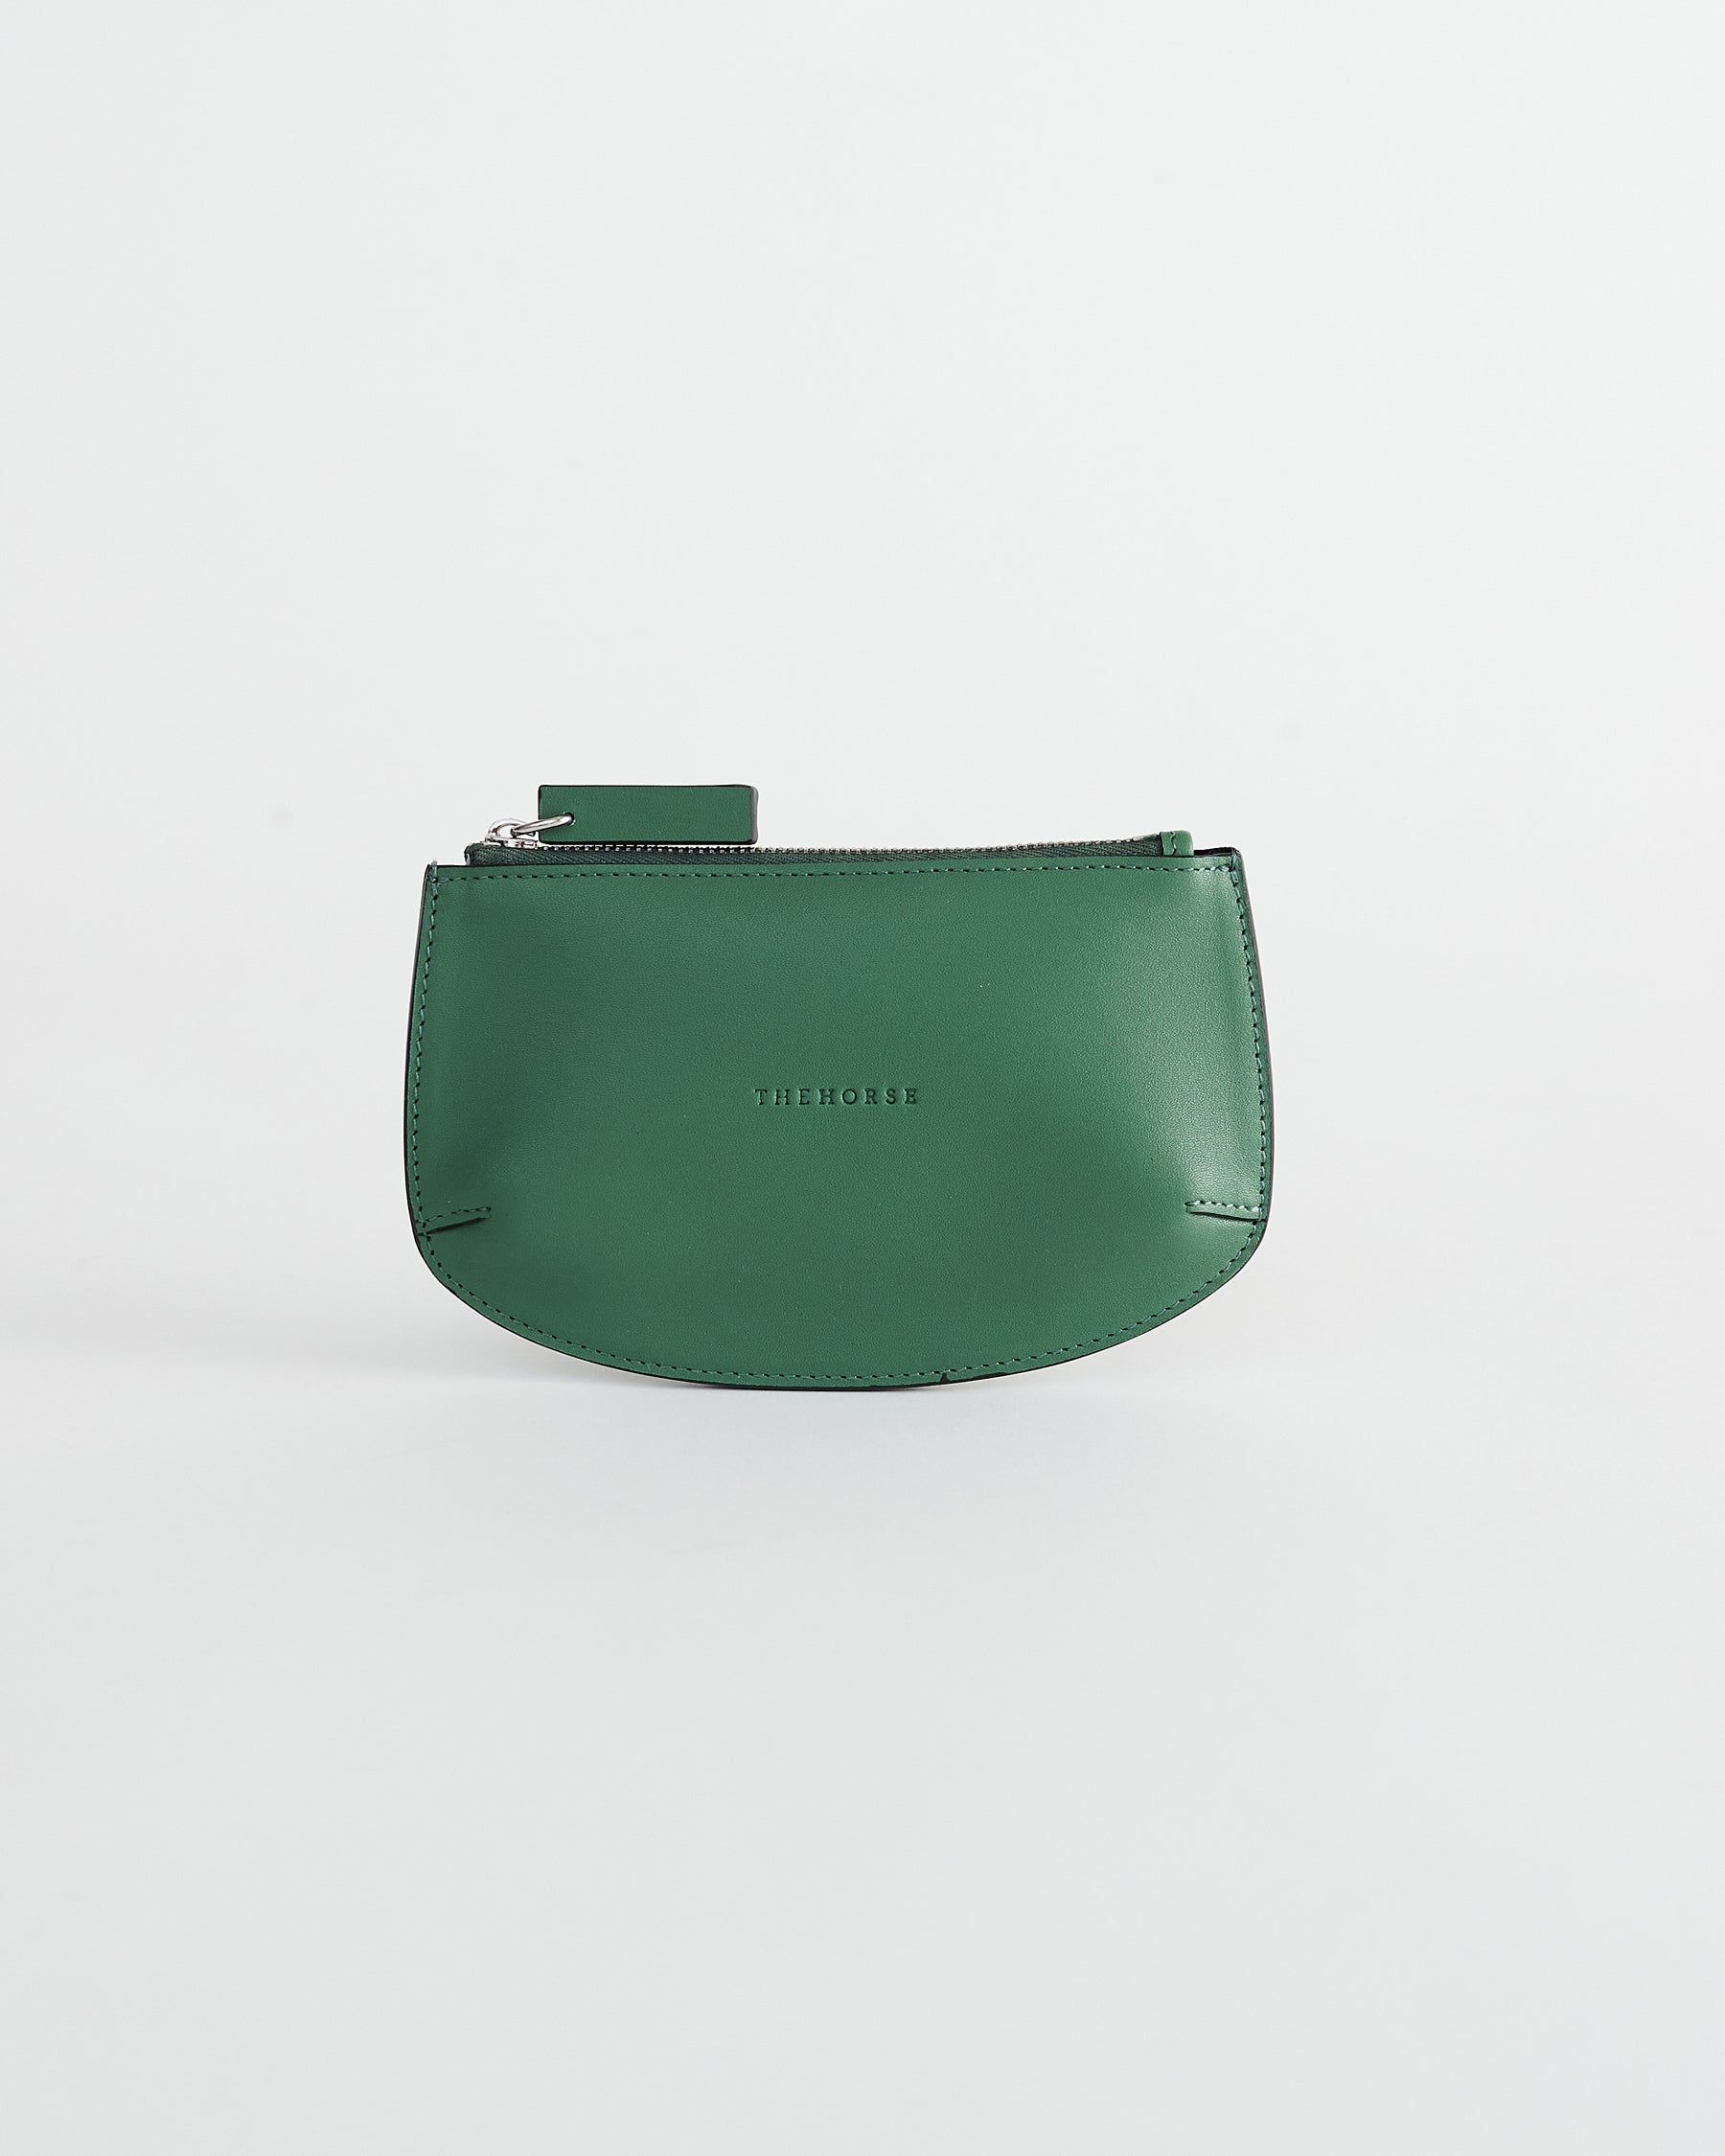 The Drew Women's Leather Zip Cardholder in Forest Green by The Horse®